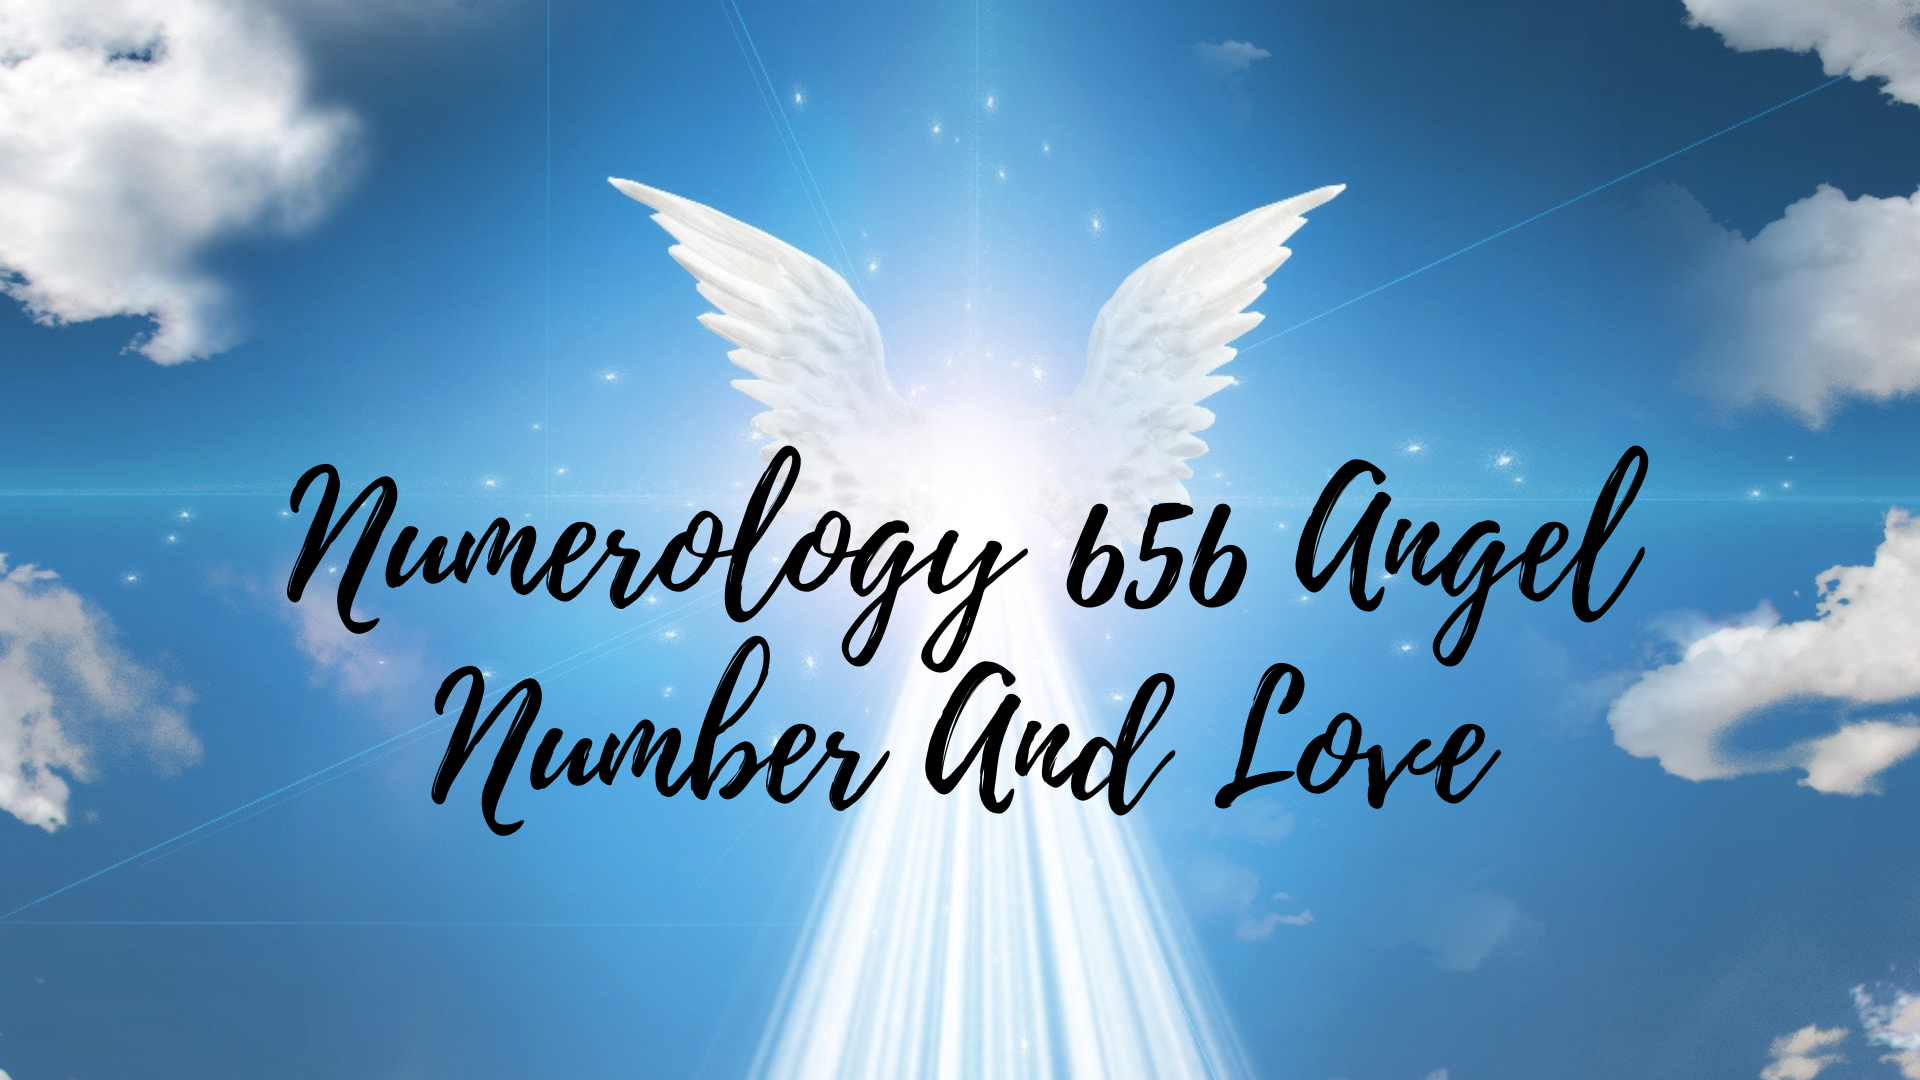 Angel wings in the sky with words Numerology 656 Angel Number And Love